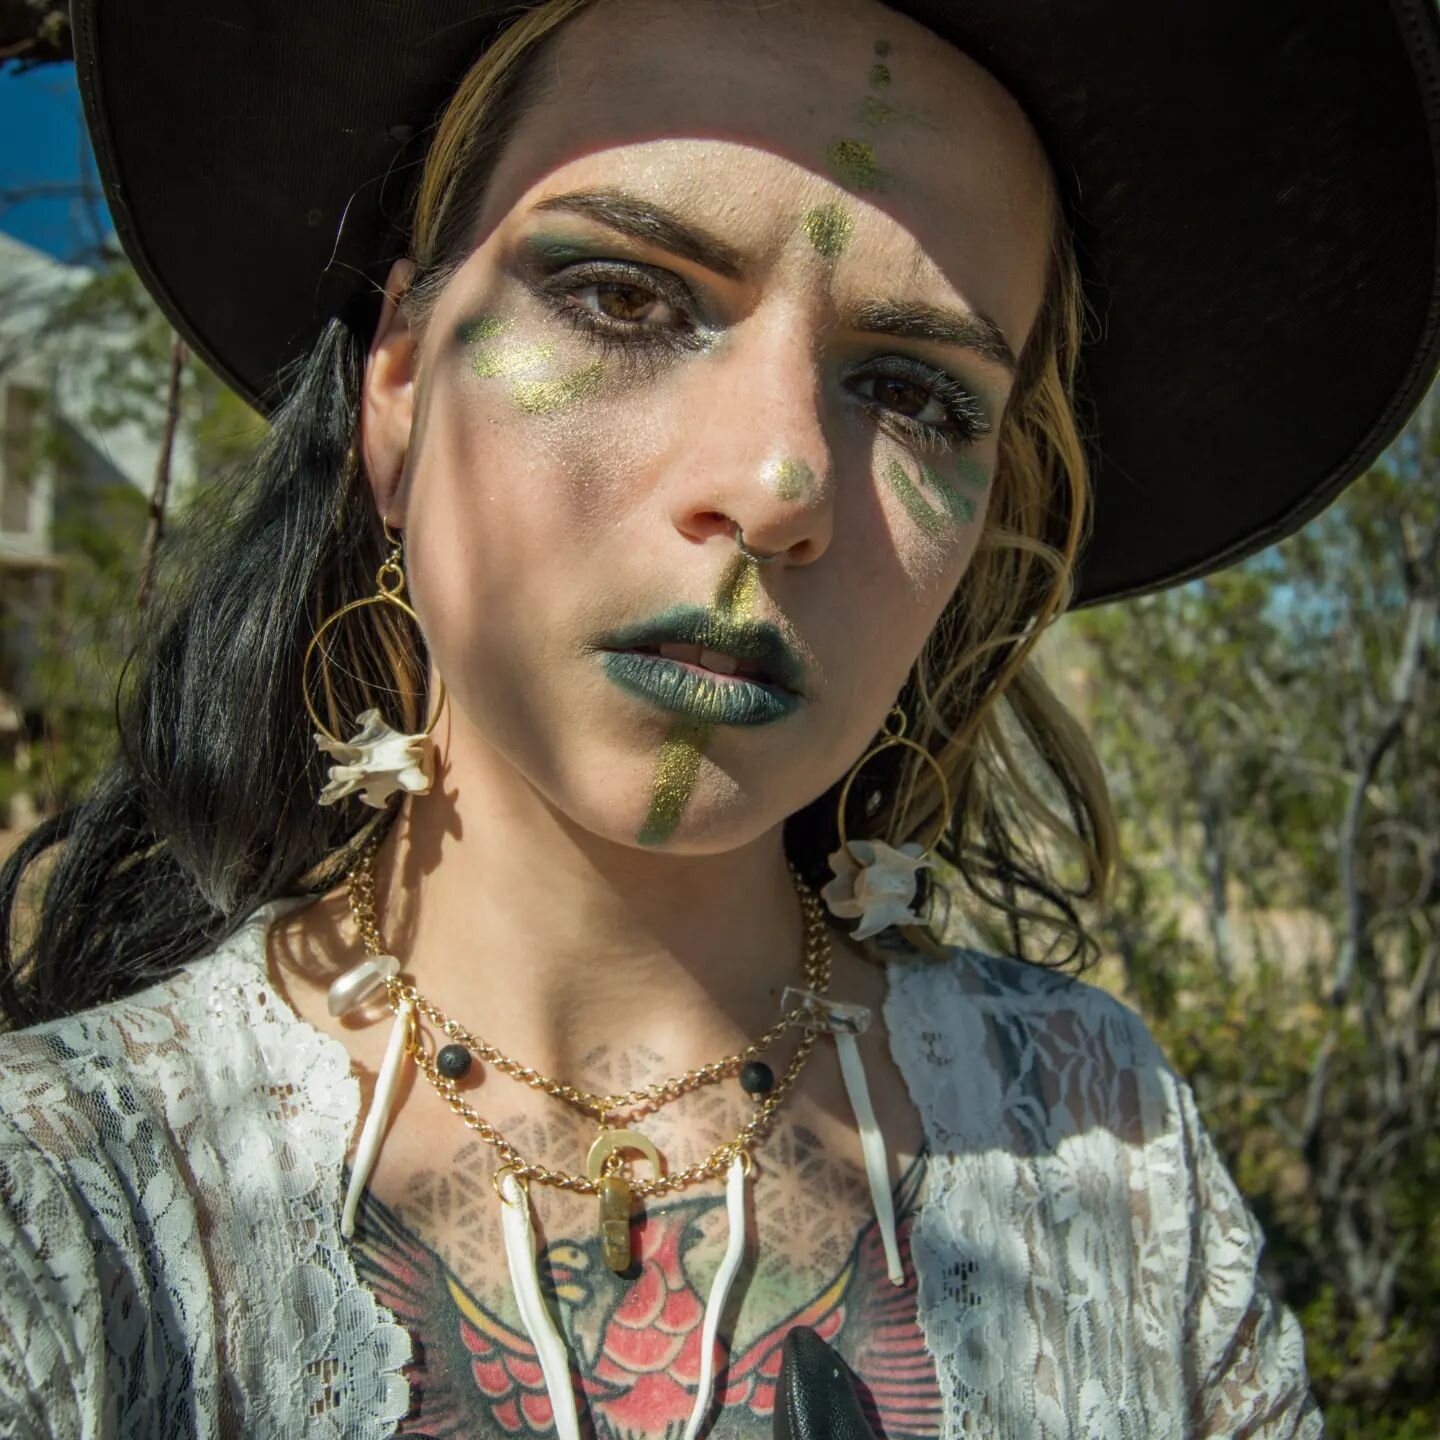 DINAMICA ☯

Handmade choker necklace, featuring coyote baculums (p*nis bone), labradorite, lava rock and clear quartz.

The necklace drew the two of pentacles card, which invites us to be dynamic in our pursuits, not only financially but in all areas